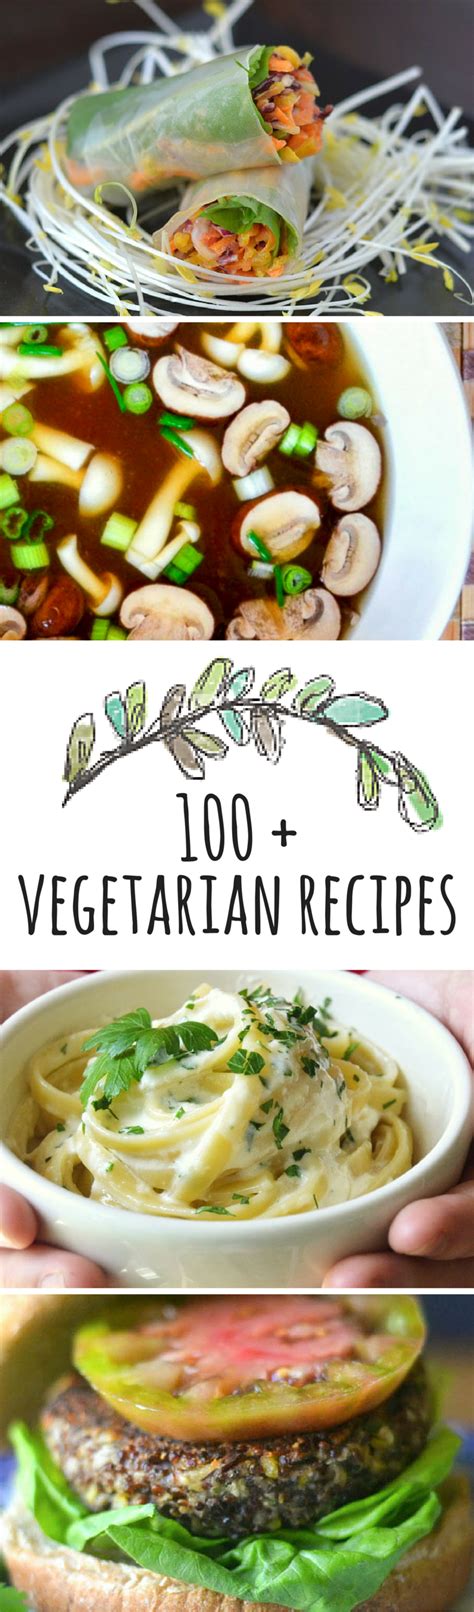 Check out our guide on how to follow a healthy vegetarian keto diet. Over 100 vibrant, healthy, and most importantly, delicious recipes! | Vegetarian vegan recipes ...